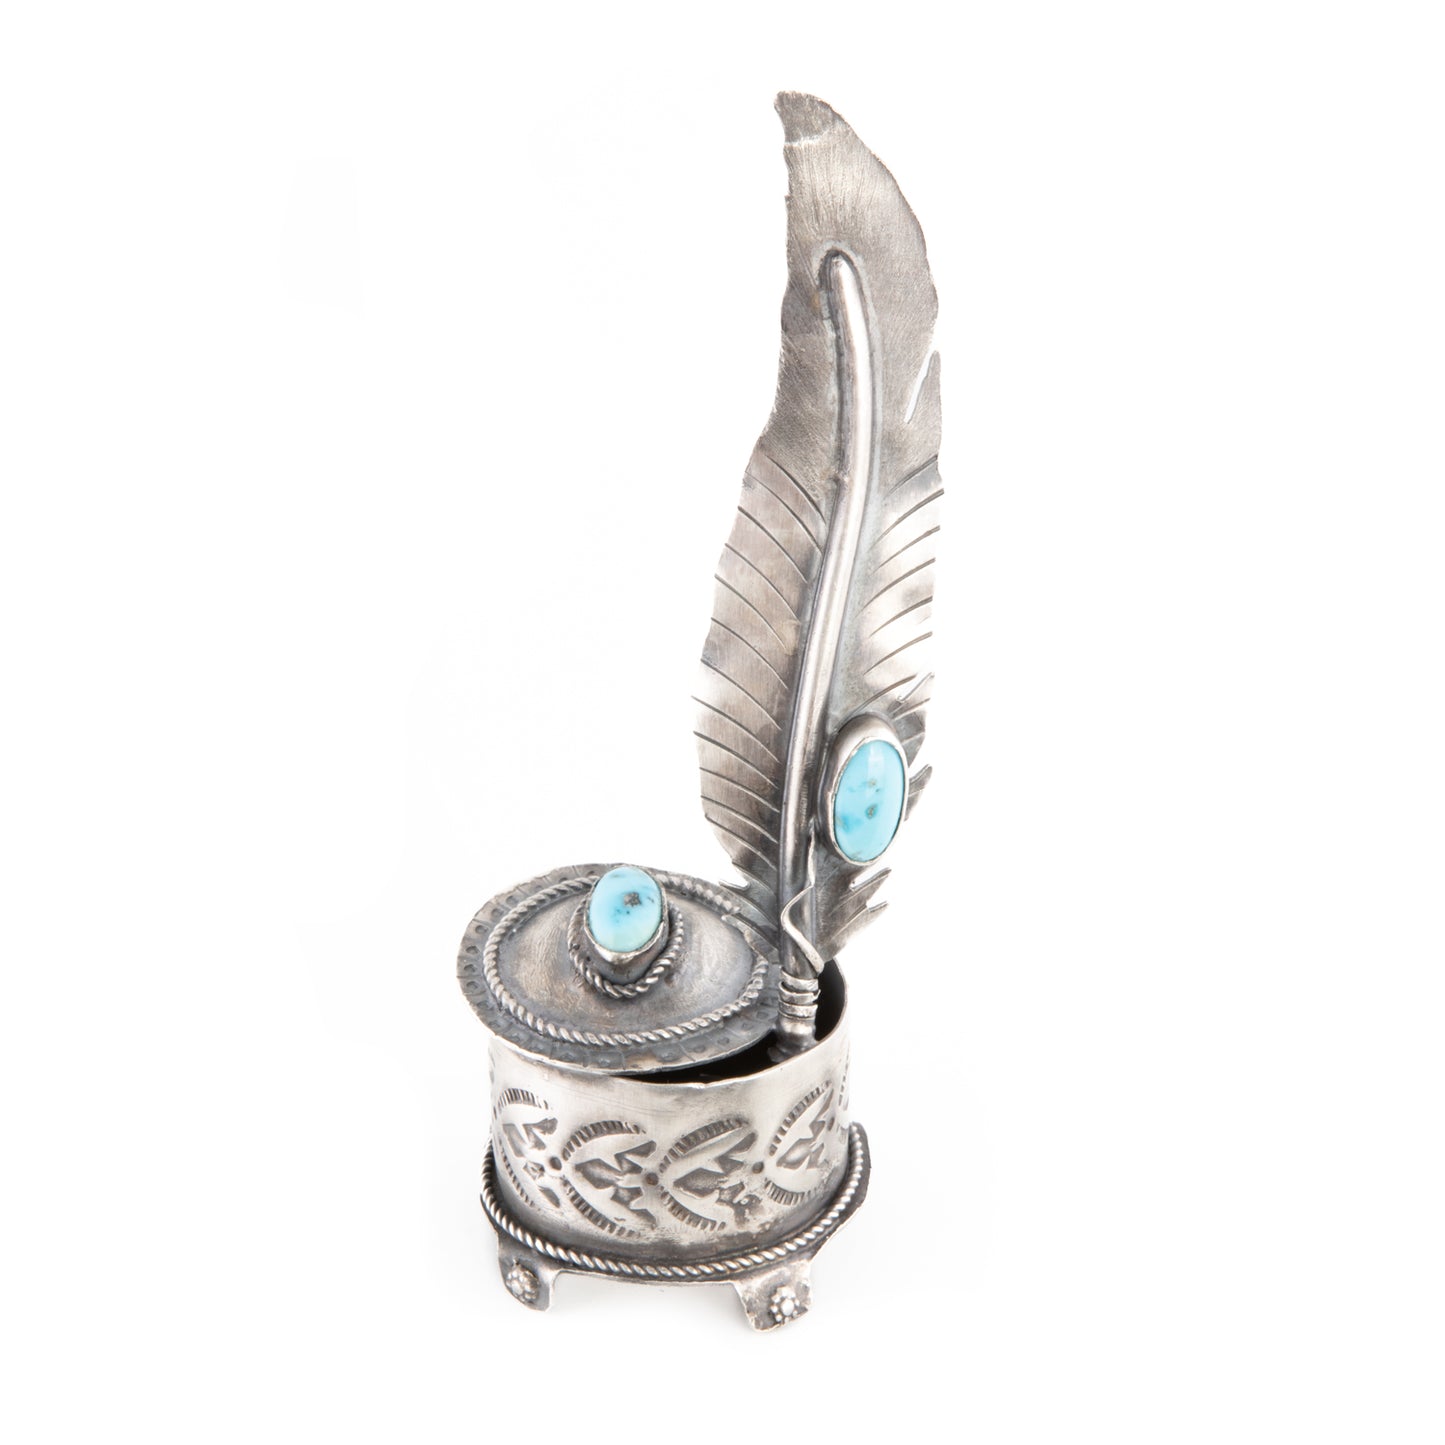 Replica Silver Inkwell and Quill Pen by Tawney Willie